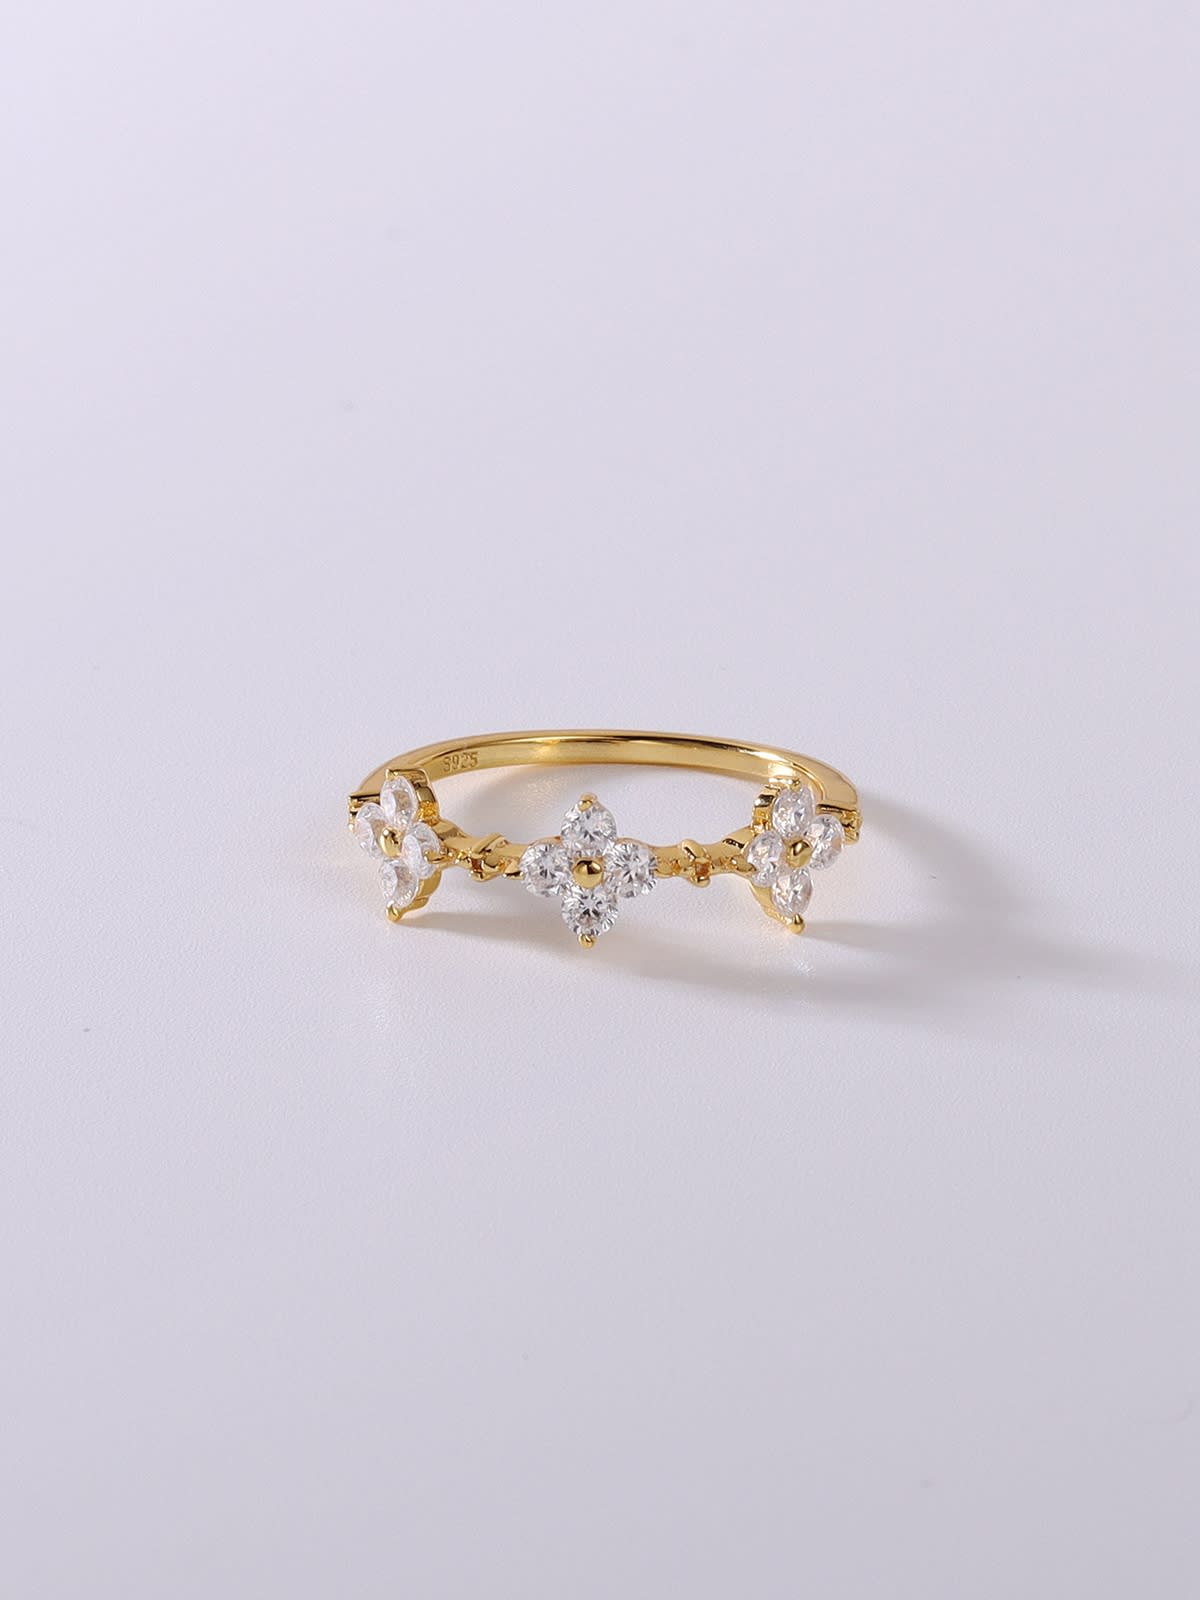 Tiny Flower Ring, Ziron 14K Gold Plated, 925 Sterling Silver Dainty Ring